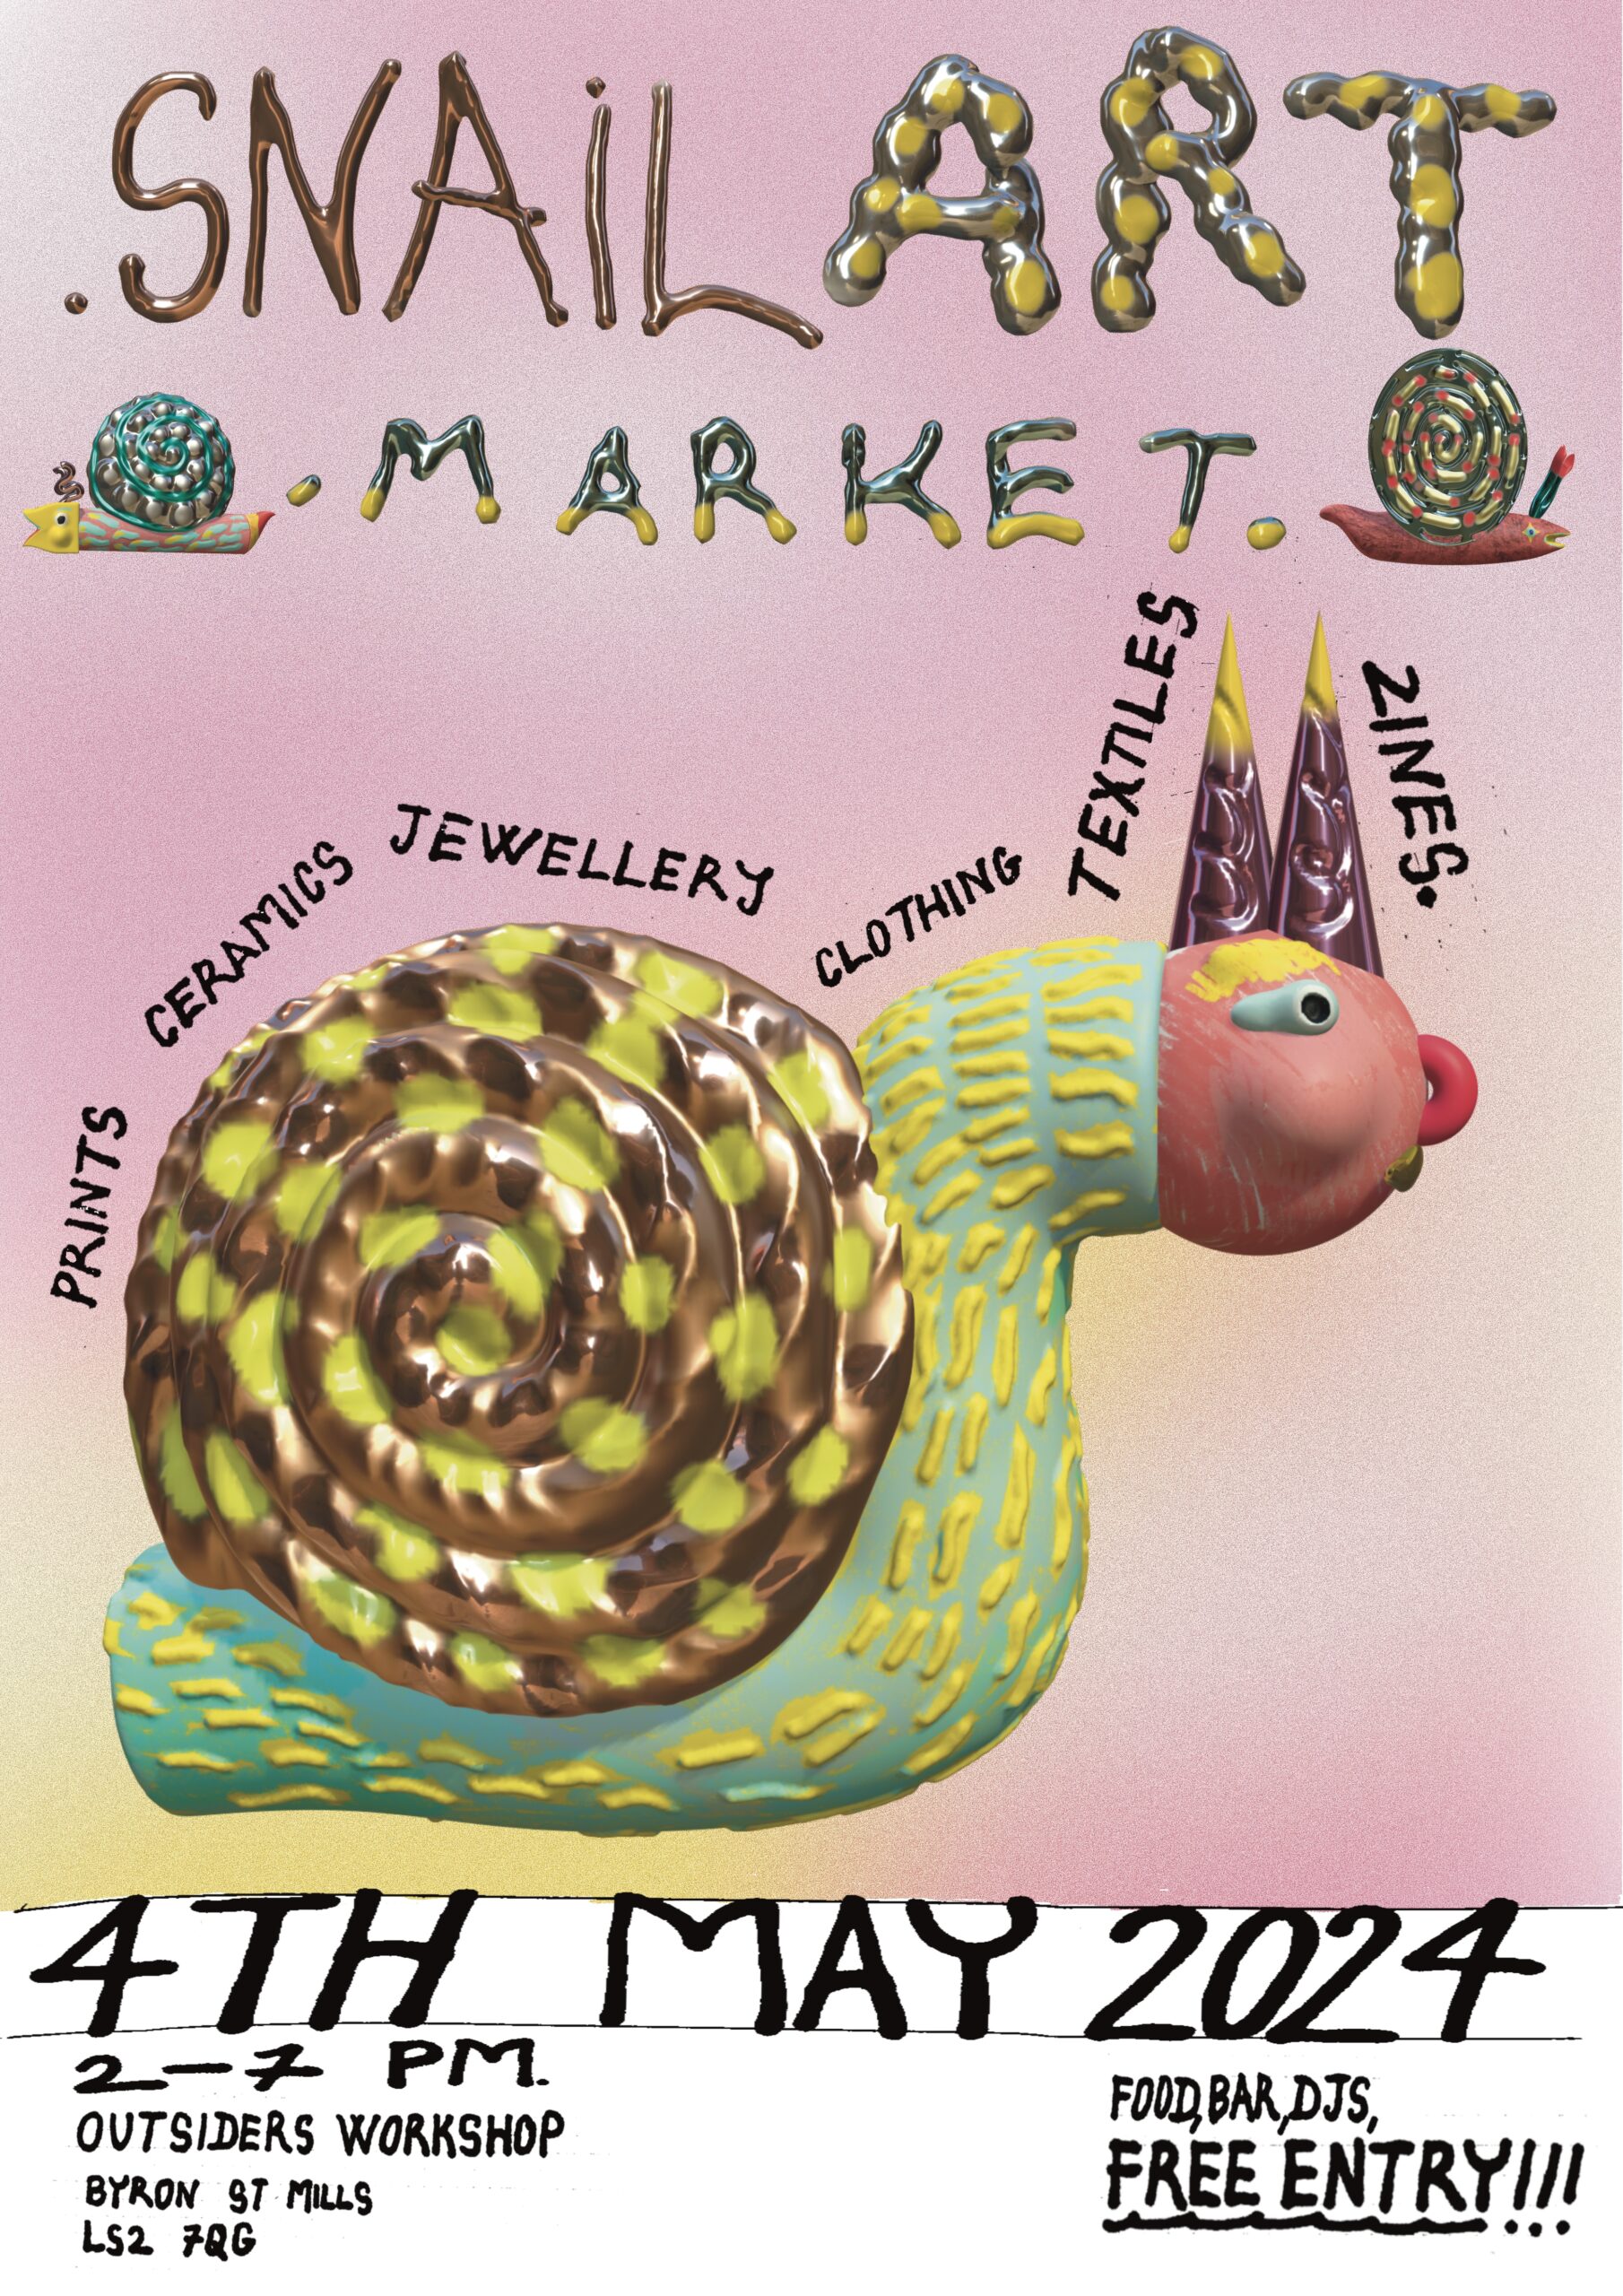 Poster for the Snail Market